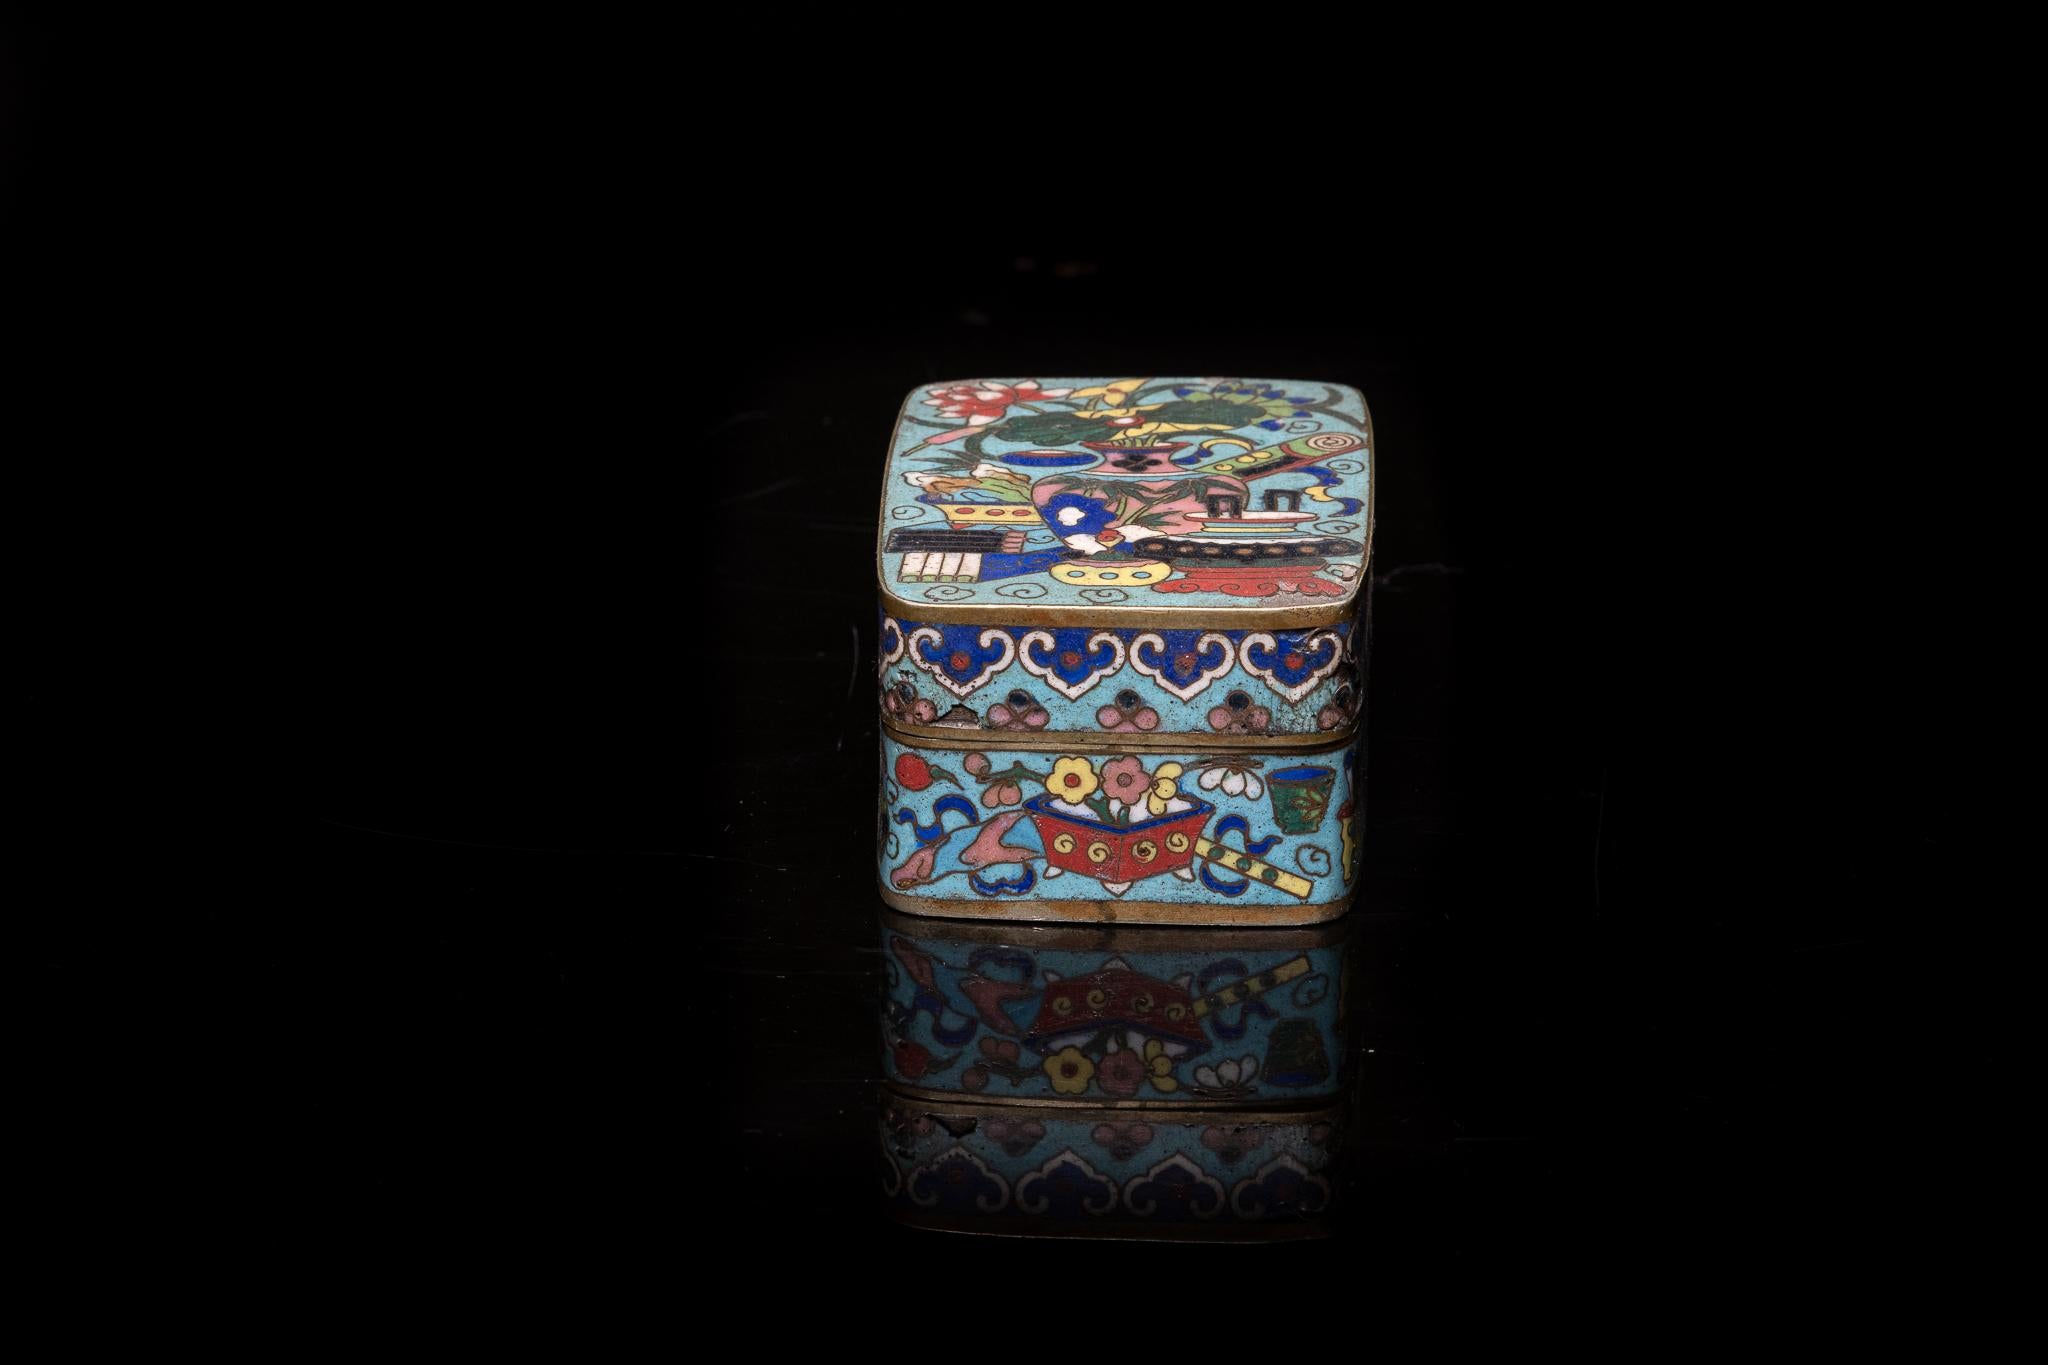 Old Chinese Opium Box in Cloisonné Enamel, decorated with Vases and Flowers.

French Private Collection